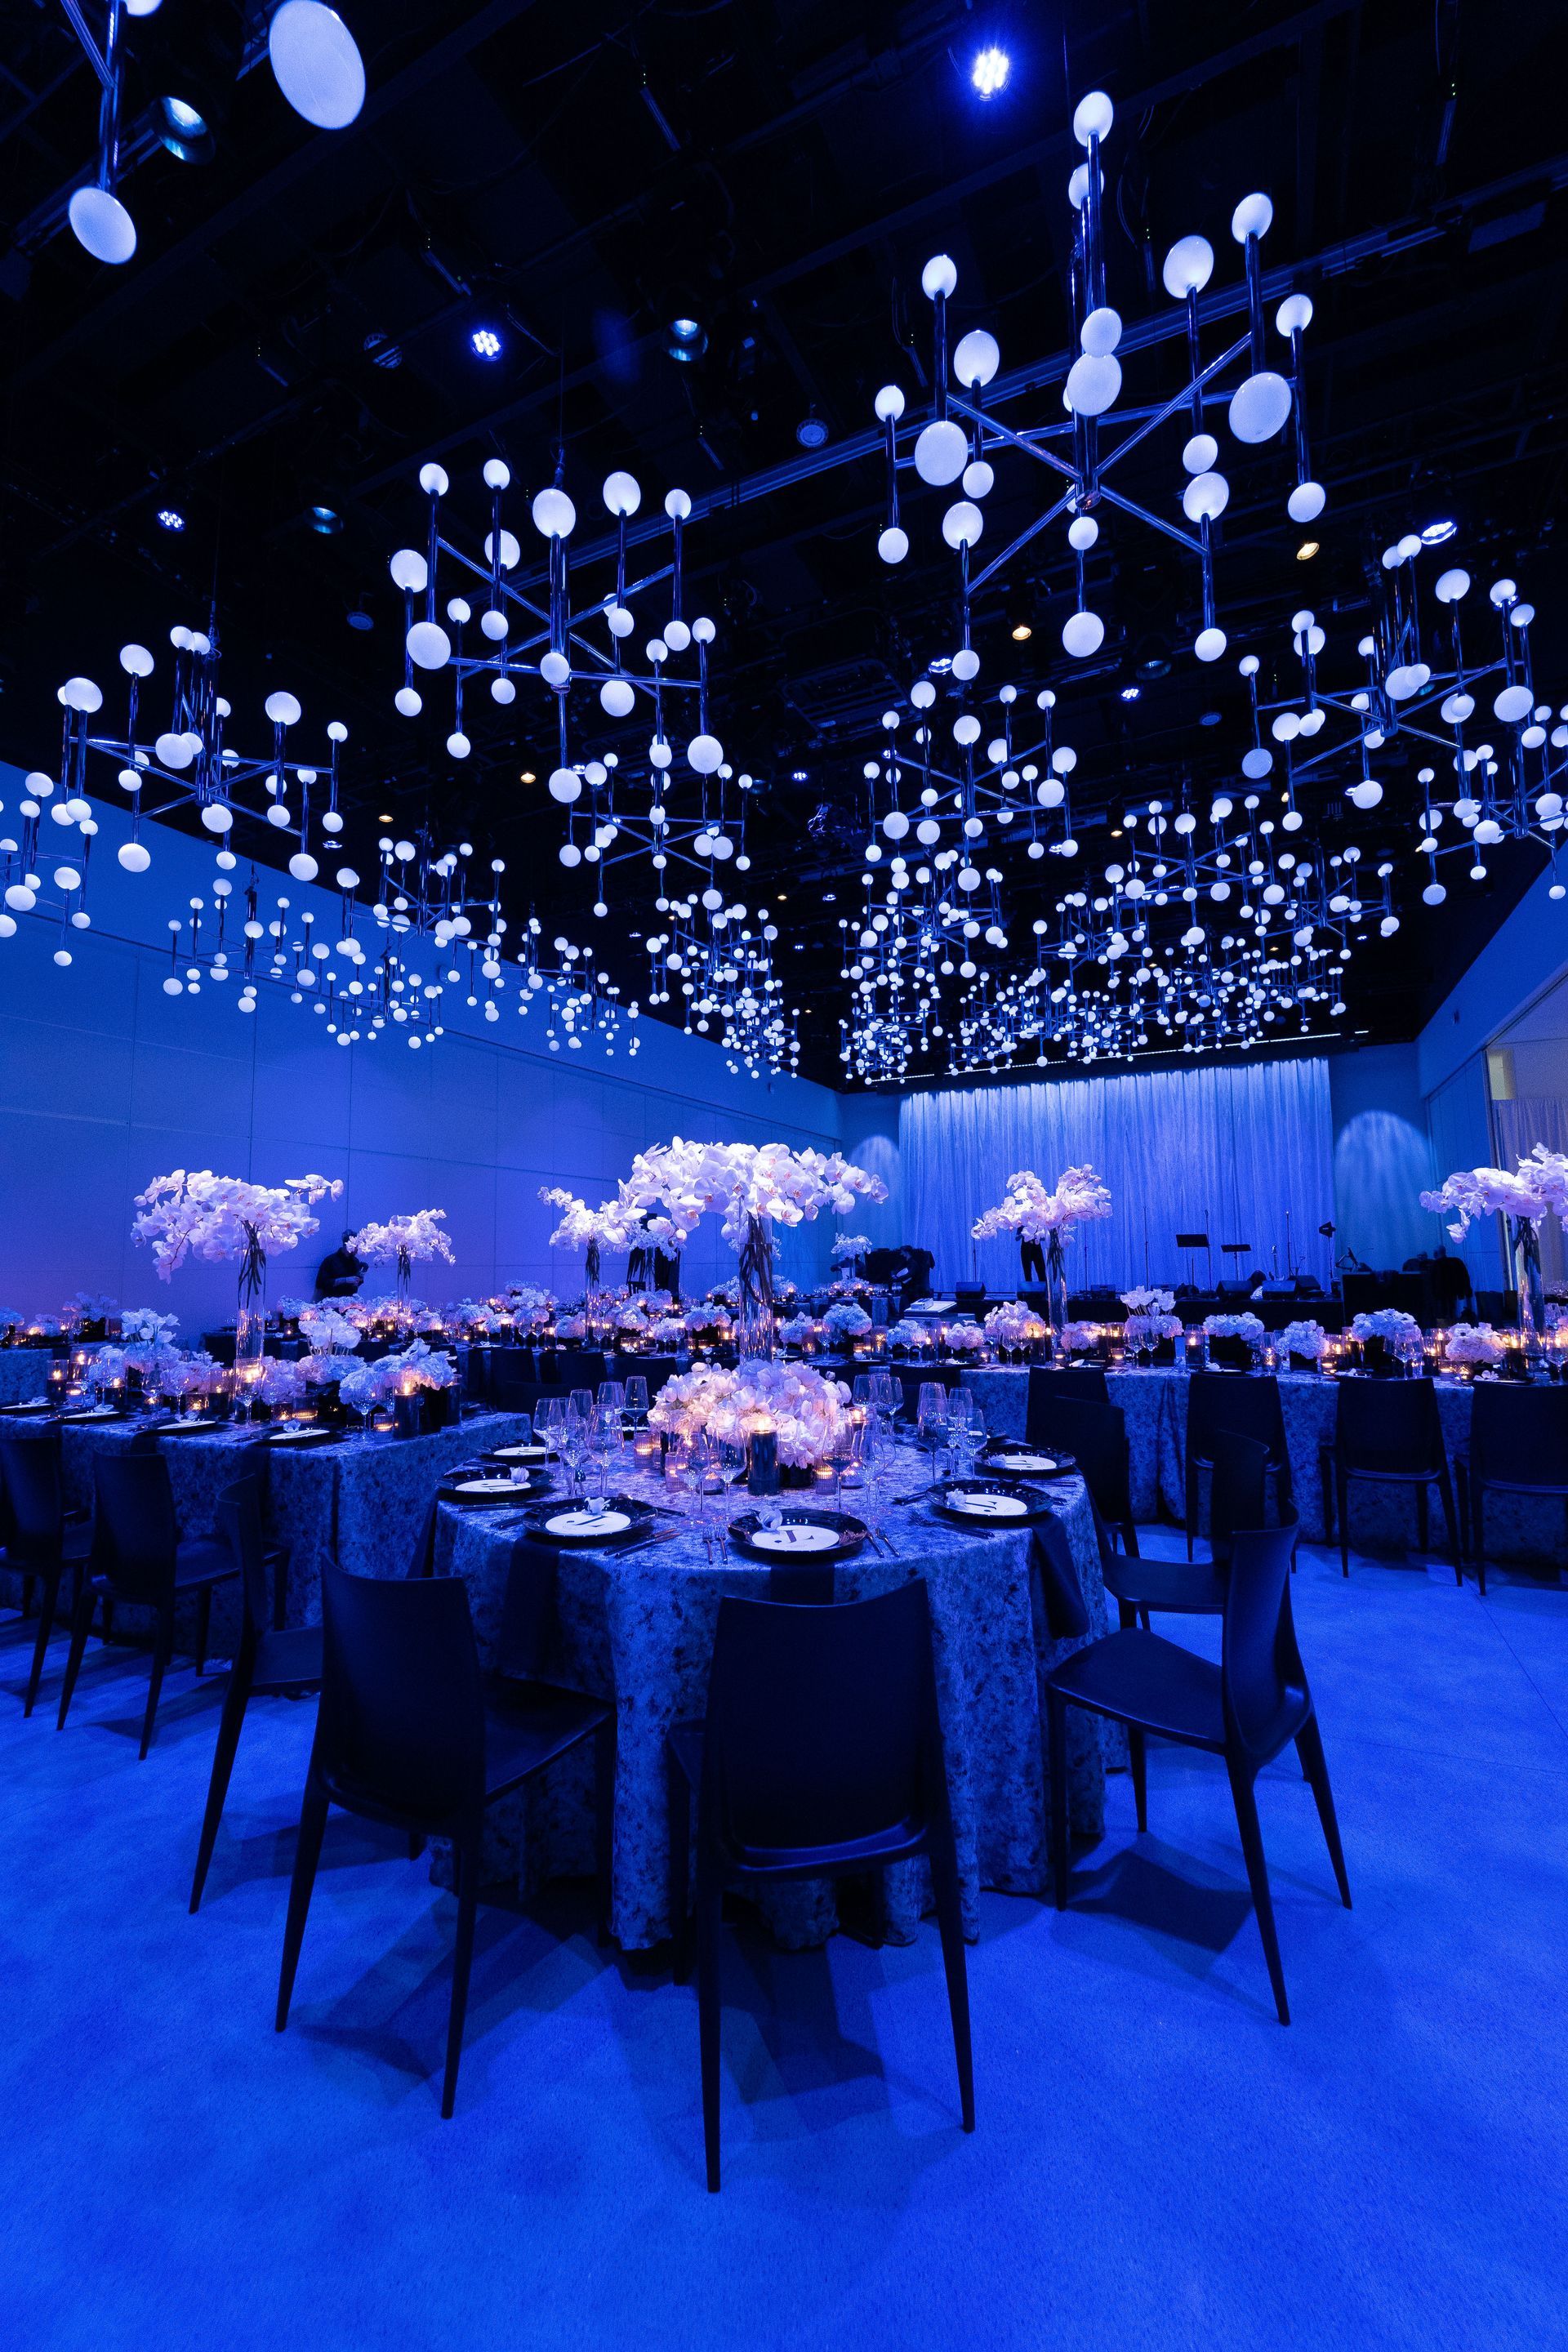 tables and chairs are set up in a large room with blue lights hanging from the ceiling